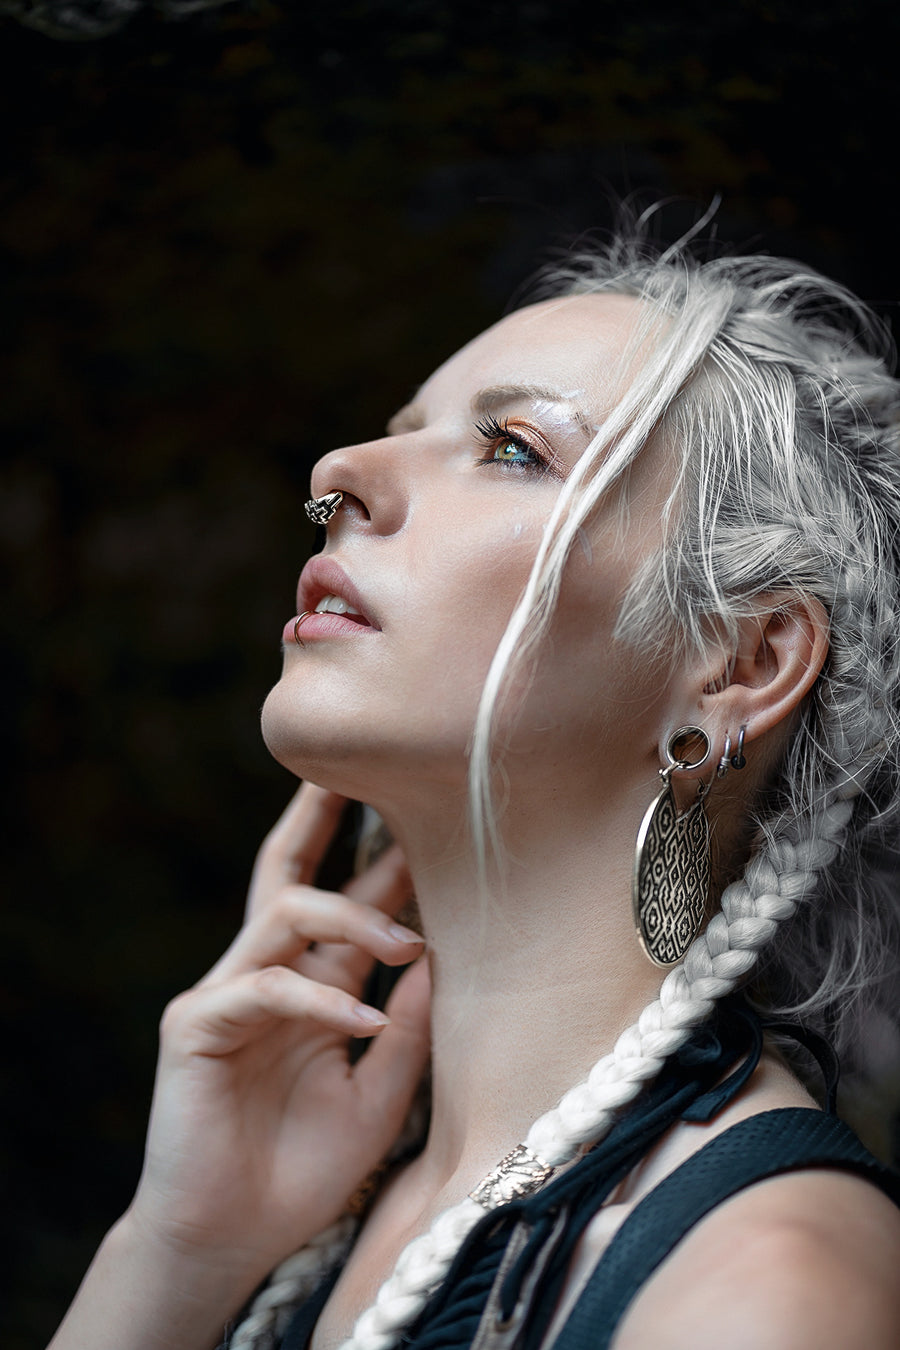 A contemplative woman with striking silver hair in braids, adorned with intricate Shipibo-inspired Silver earrings and a septum piercing, gazes upward, embodying a blend of tribal elegance and modern style.